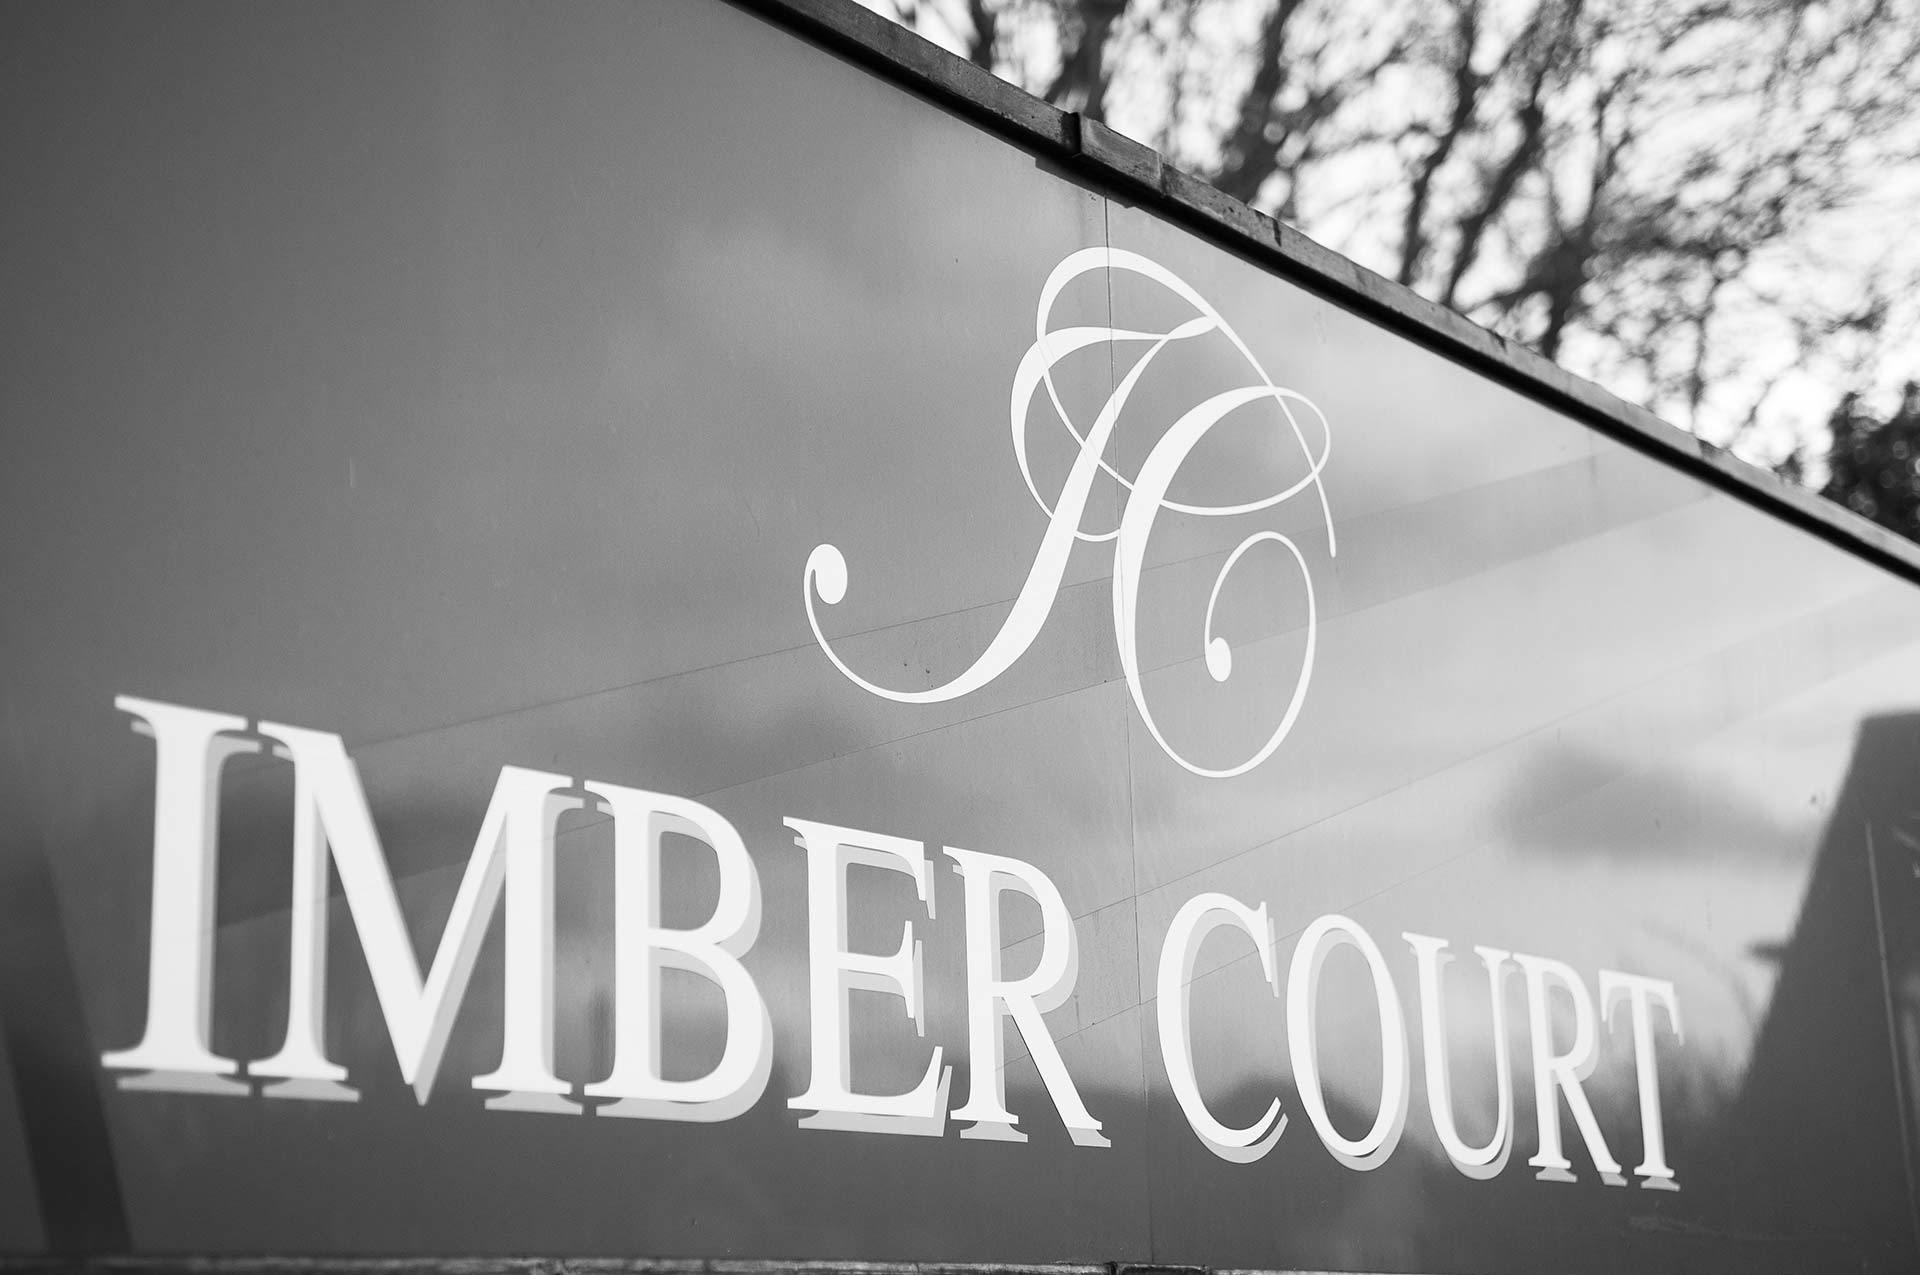 the Imber Court sign at the front of the Club House